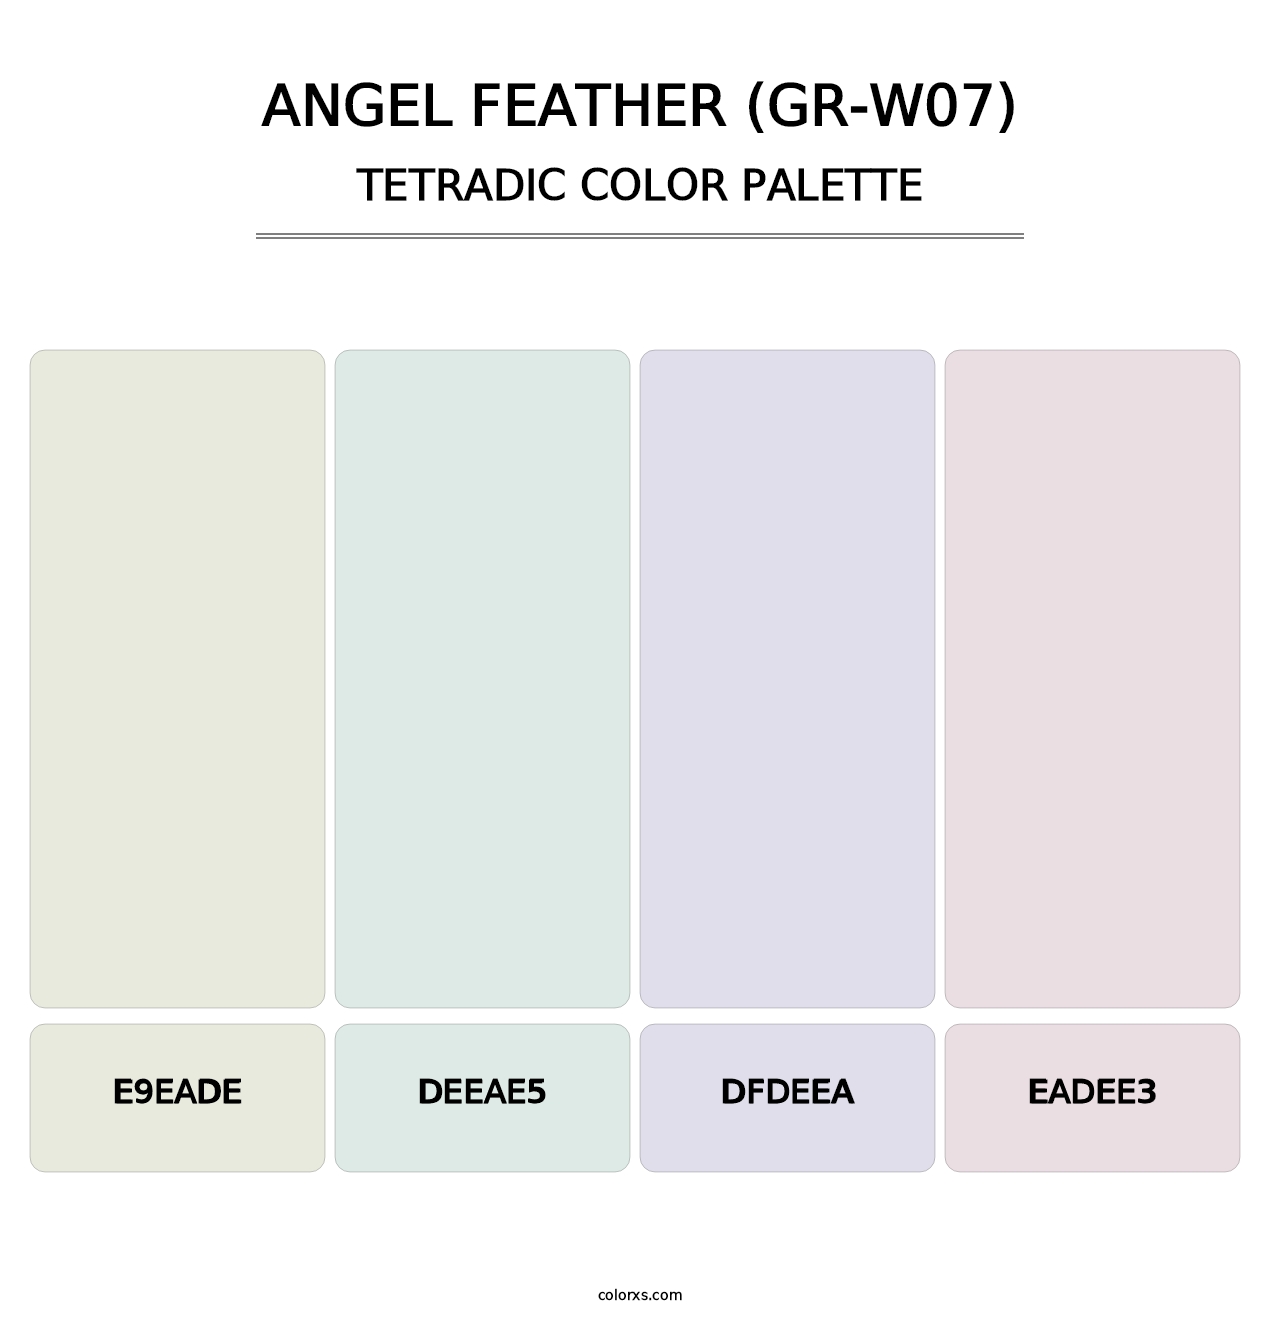 Angel Feather (GR-W07) - Tetradic Color Palette